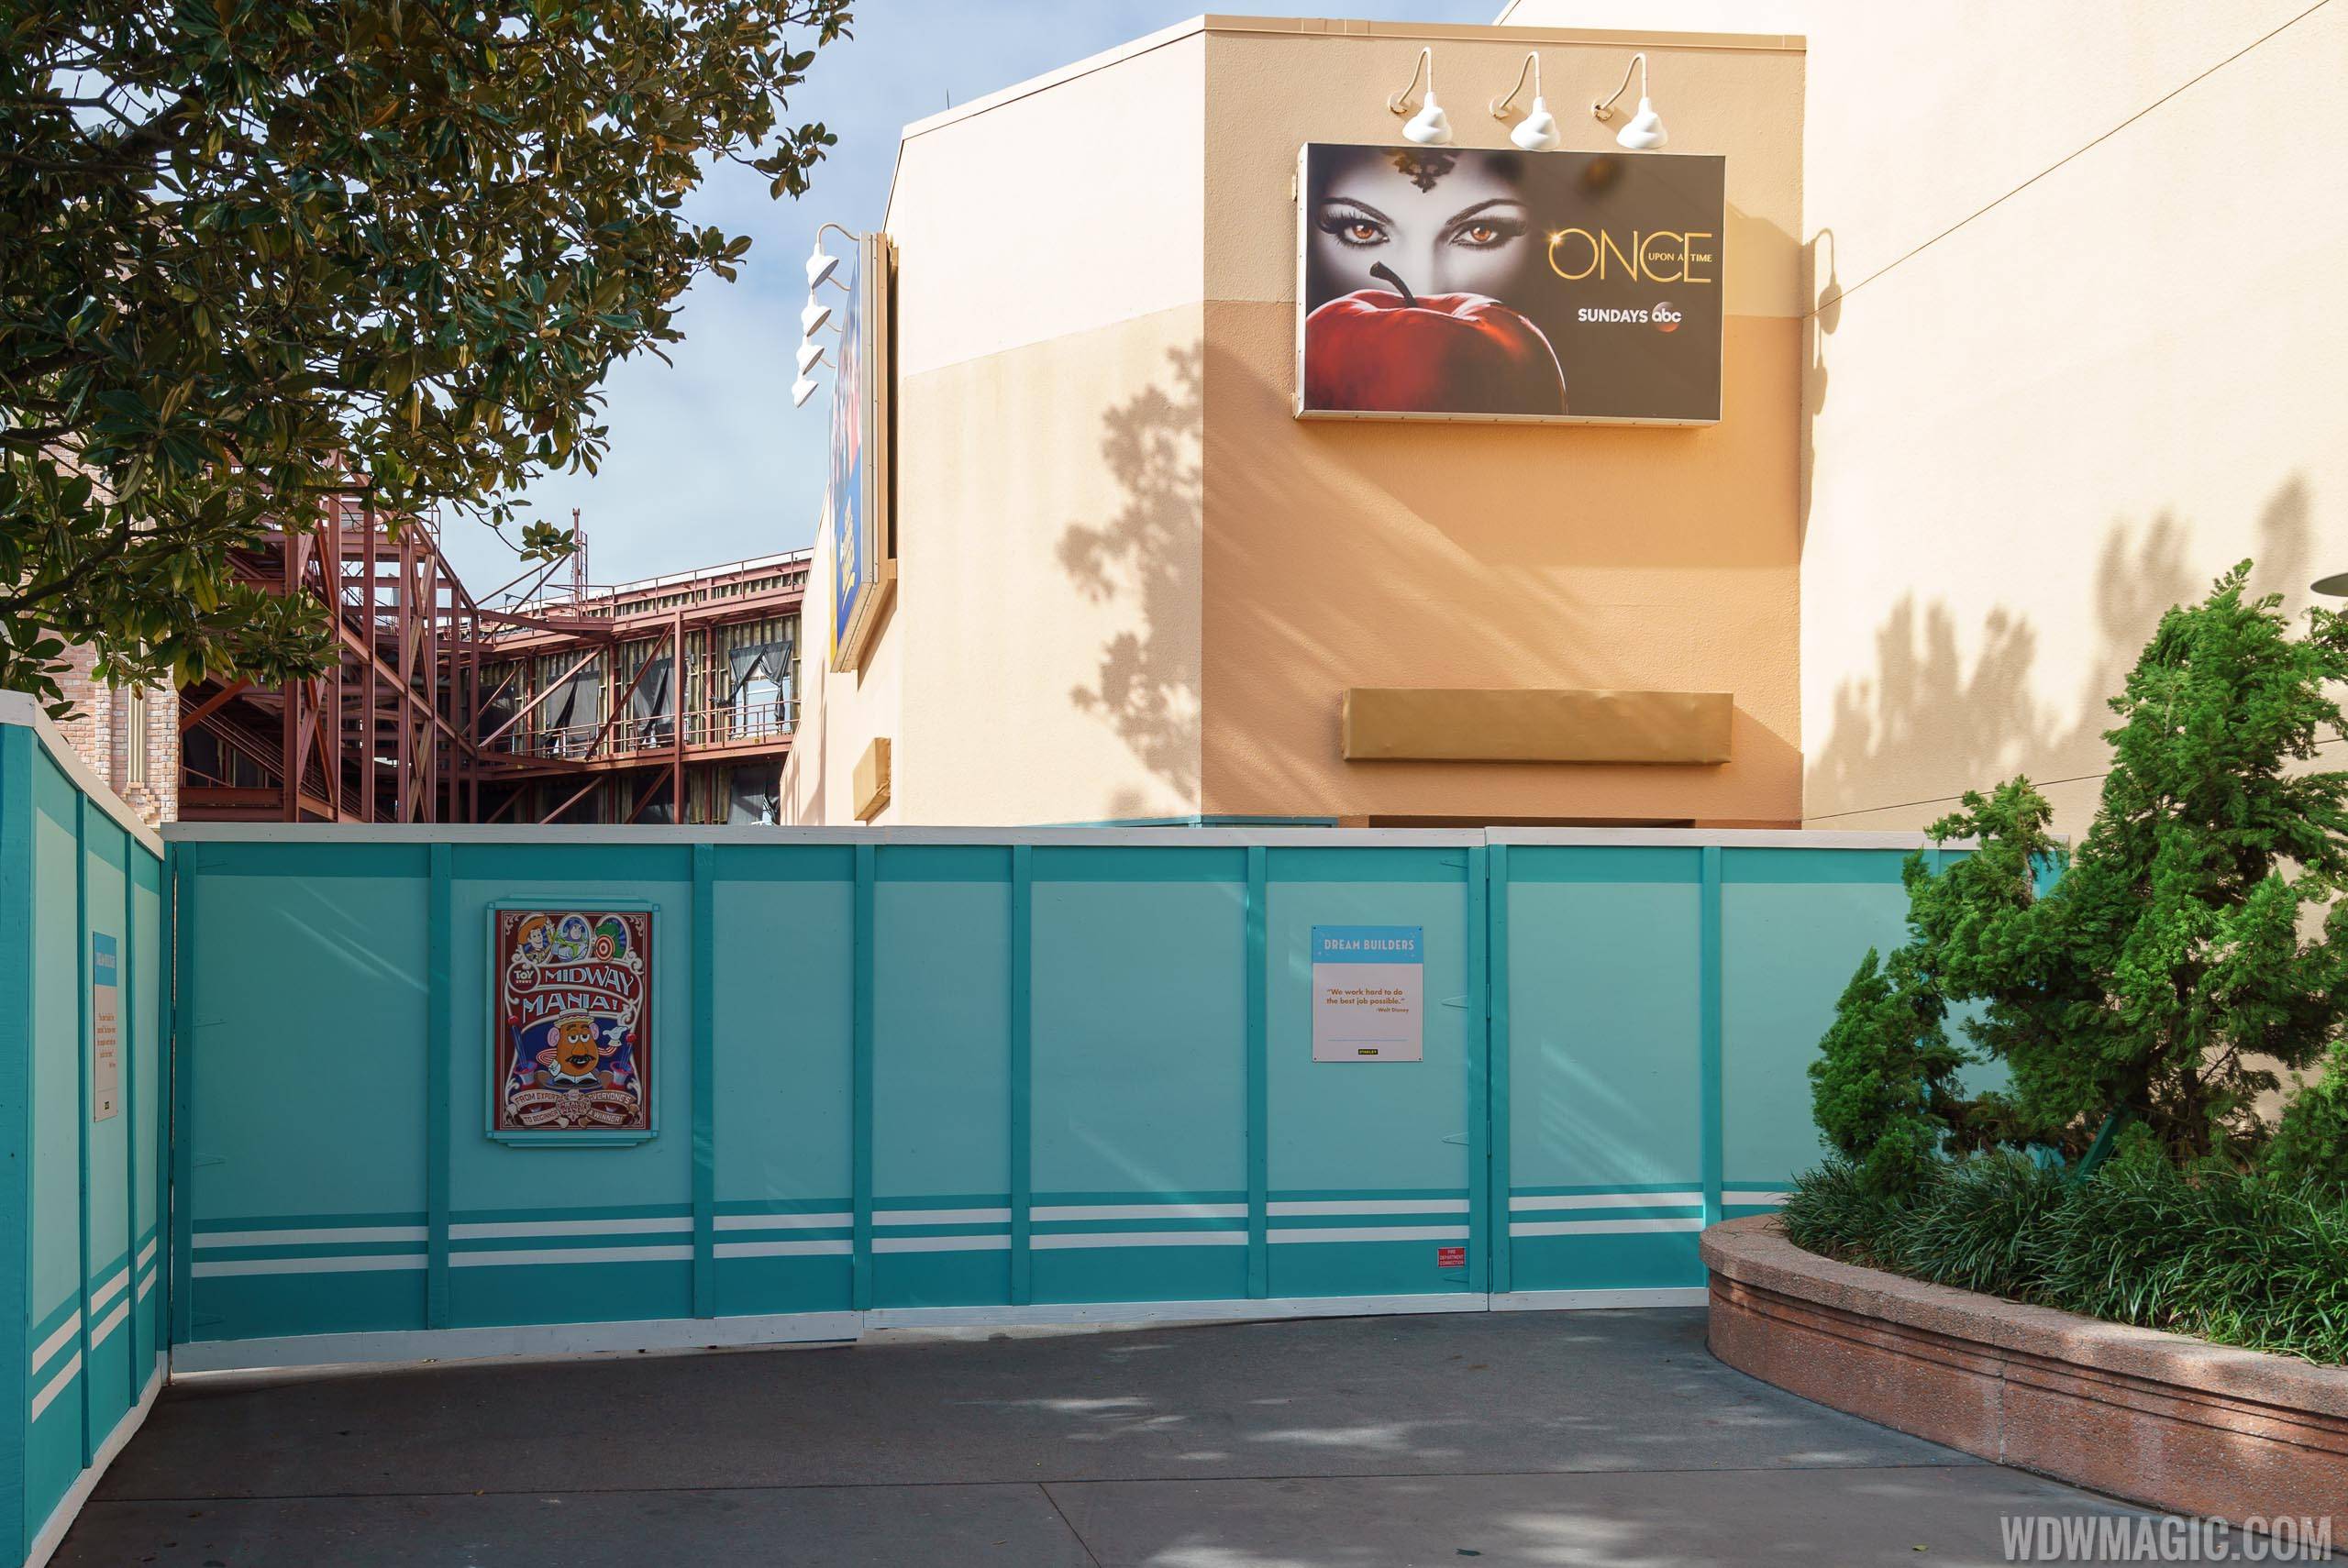 Backlot cleared ahead of Star Wars and Toy Story Lands